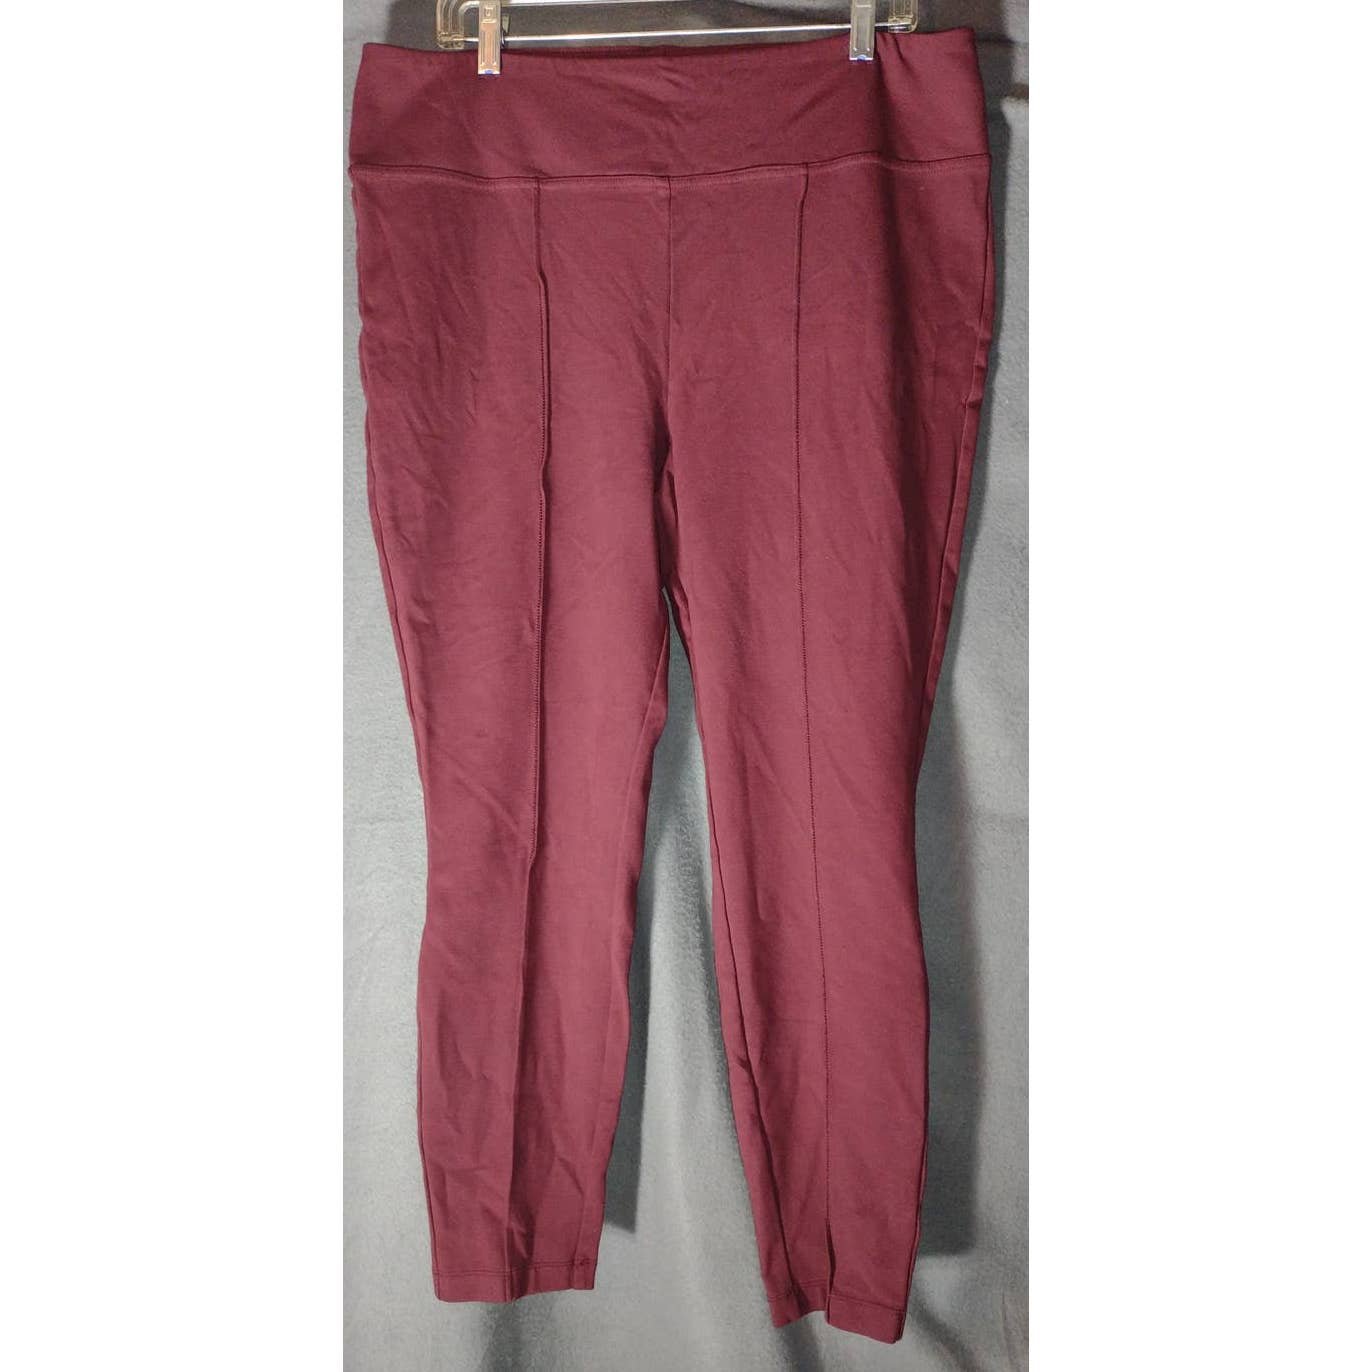 good price NINE WEST WOMEN´S RED XL ATHLETIC JEGGINGS G2vq5rOgz Counter Genuine 